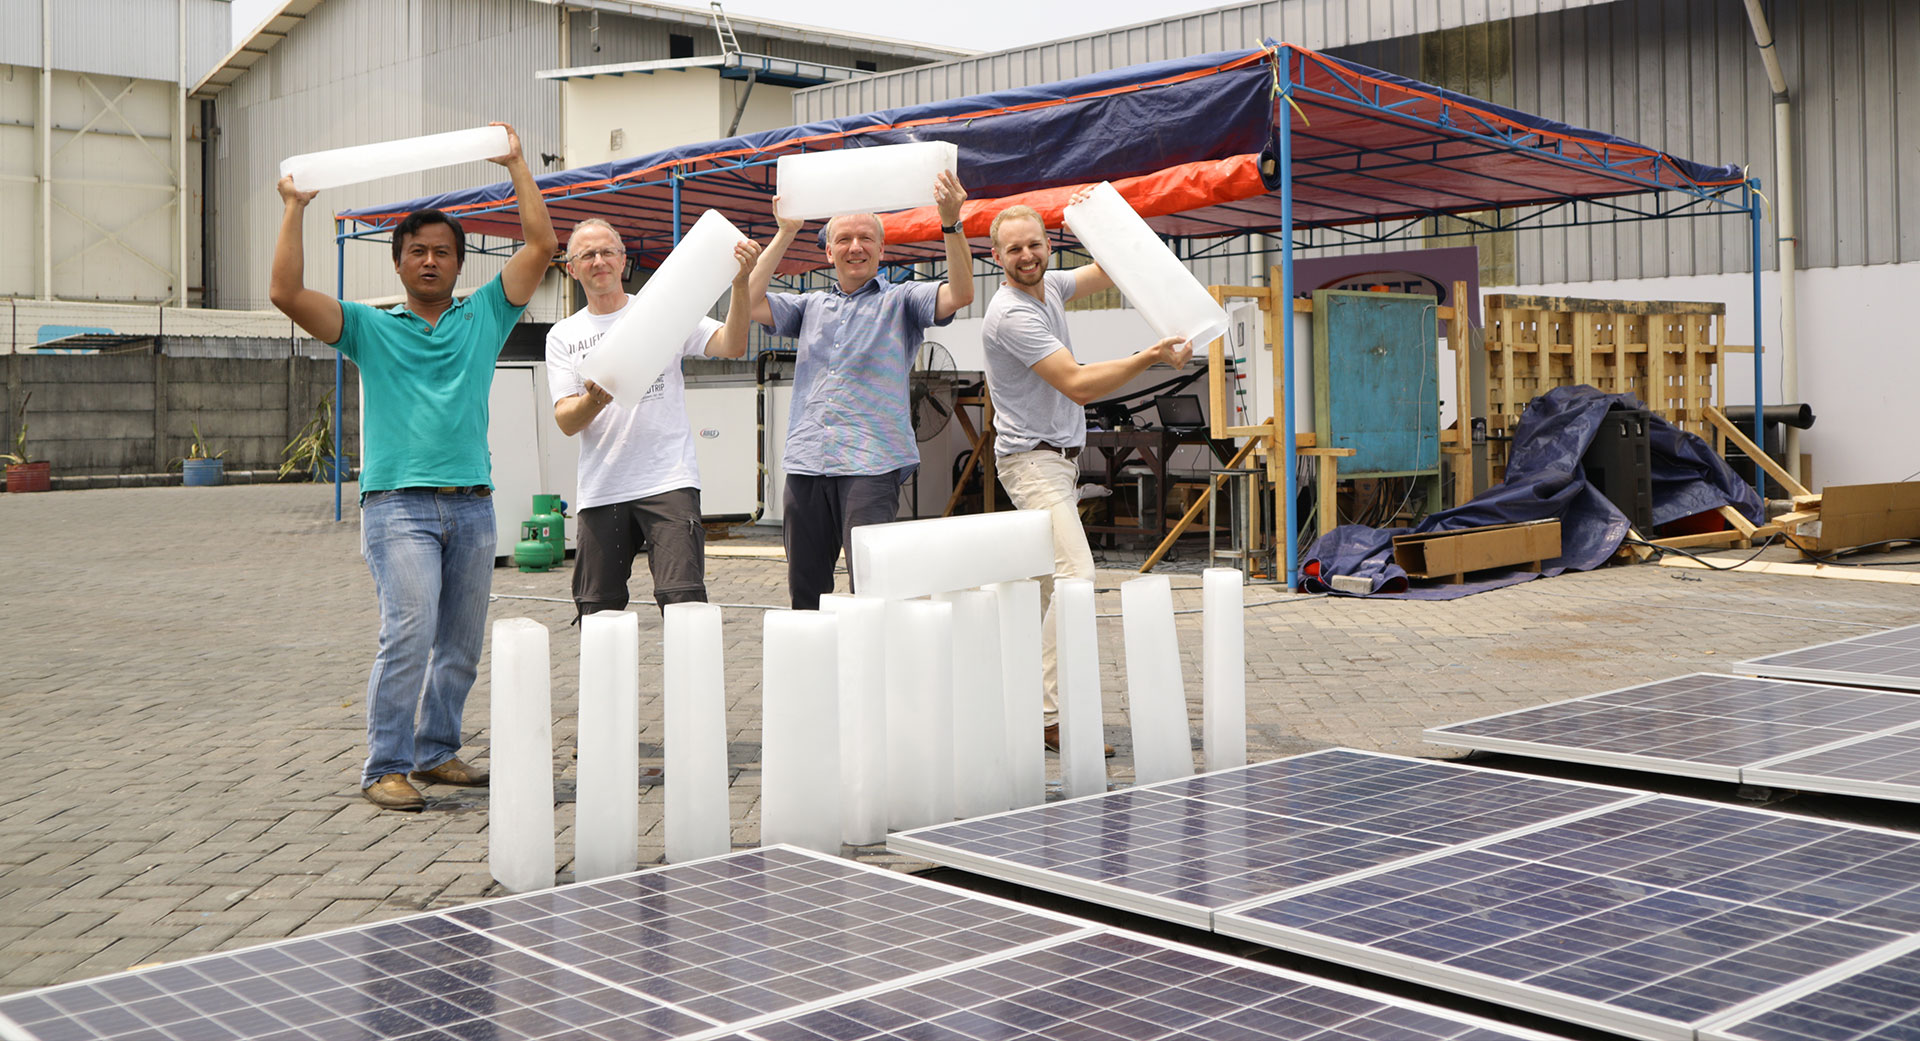 Despite many hurdles during the Corona pandemic, everyone involved has worked tirelessly to ensure that the first solar ice maker of this Indonesian-German collaboration will be launched in Sulamu in 2022.